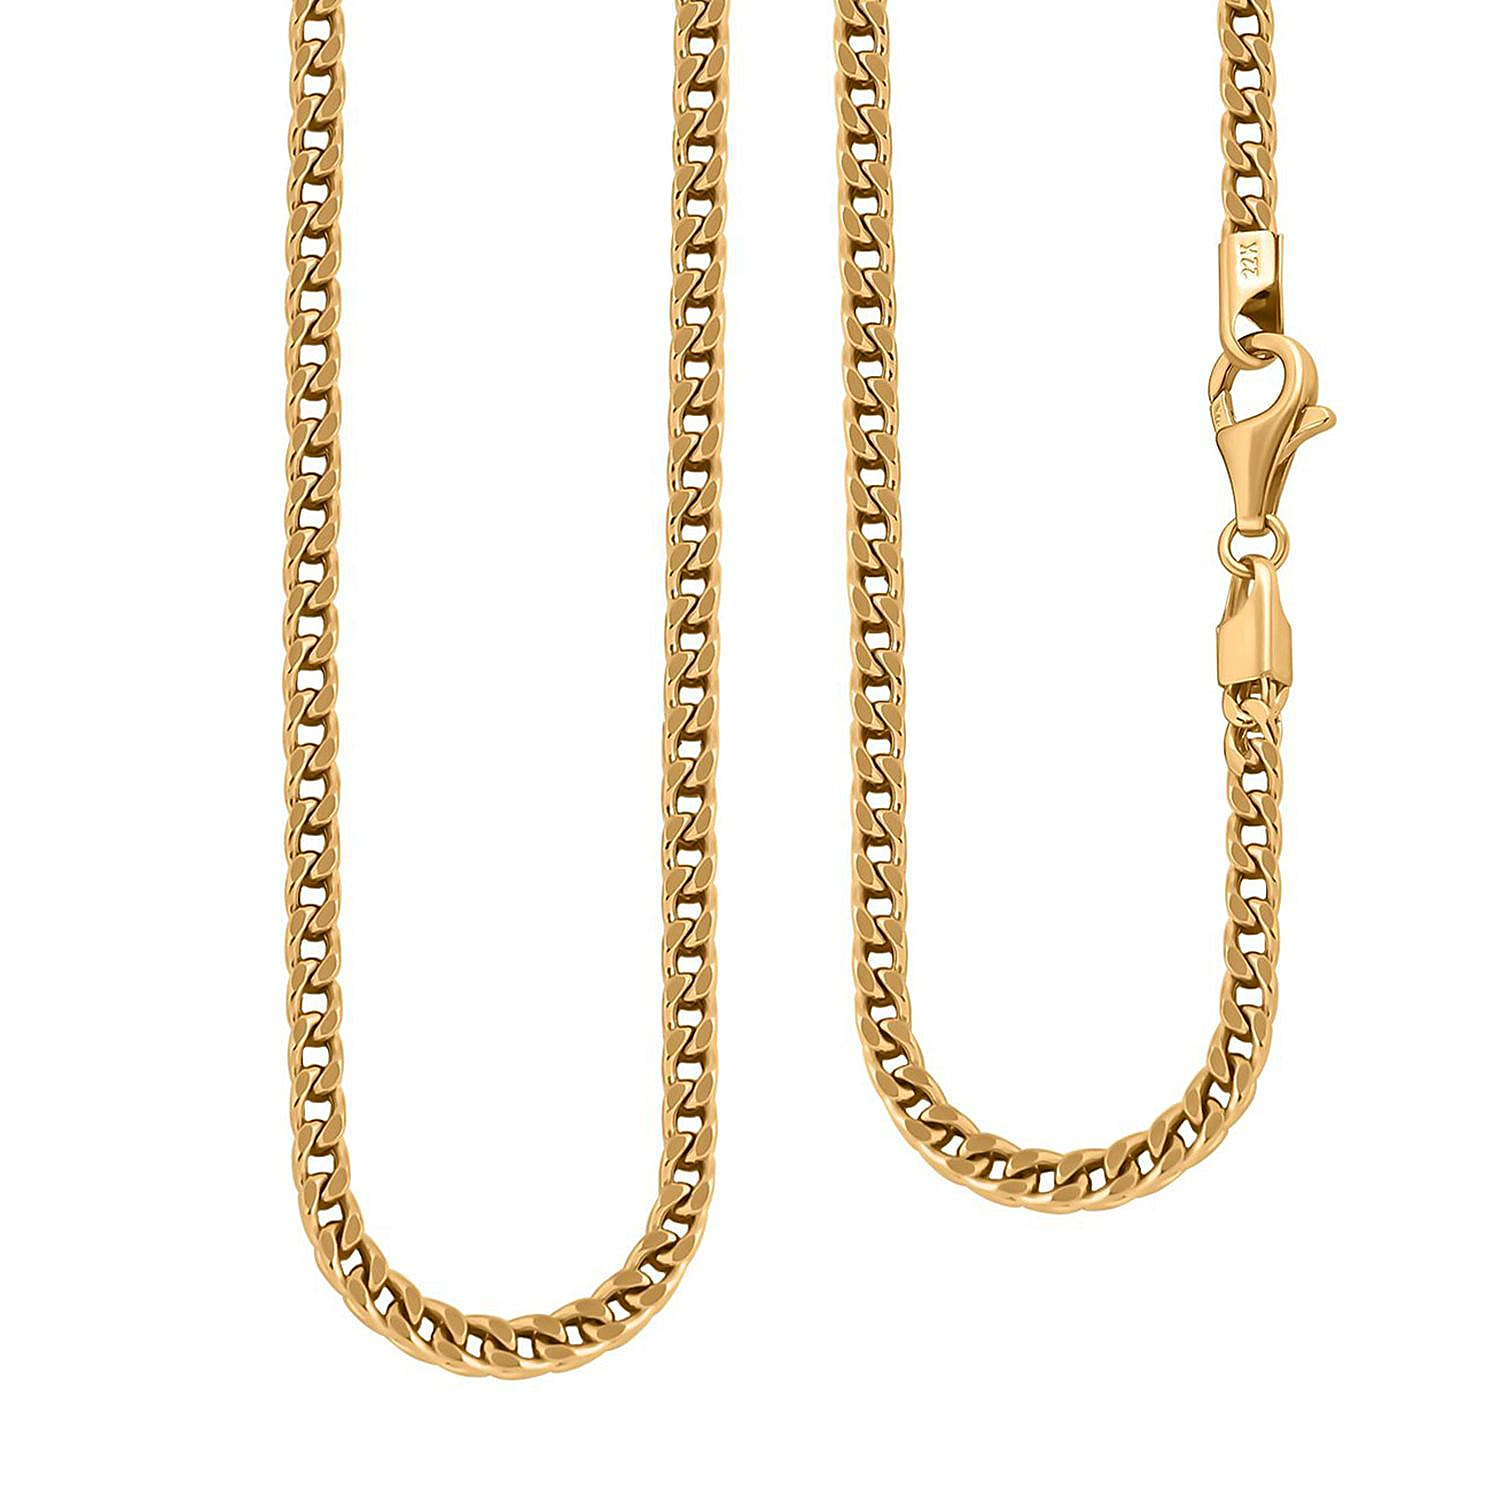 One Time Deal - 22K Yellow Gold (91.6% Gold Purity) SOLID Spiga Necklace (Size - 20), Gold Wt. 19.60 Gms